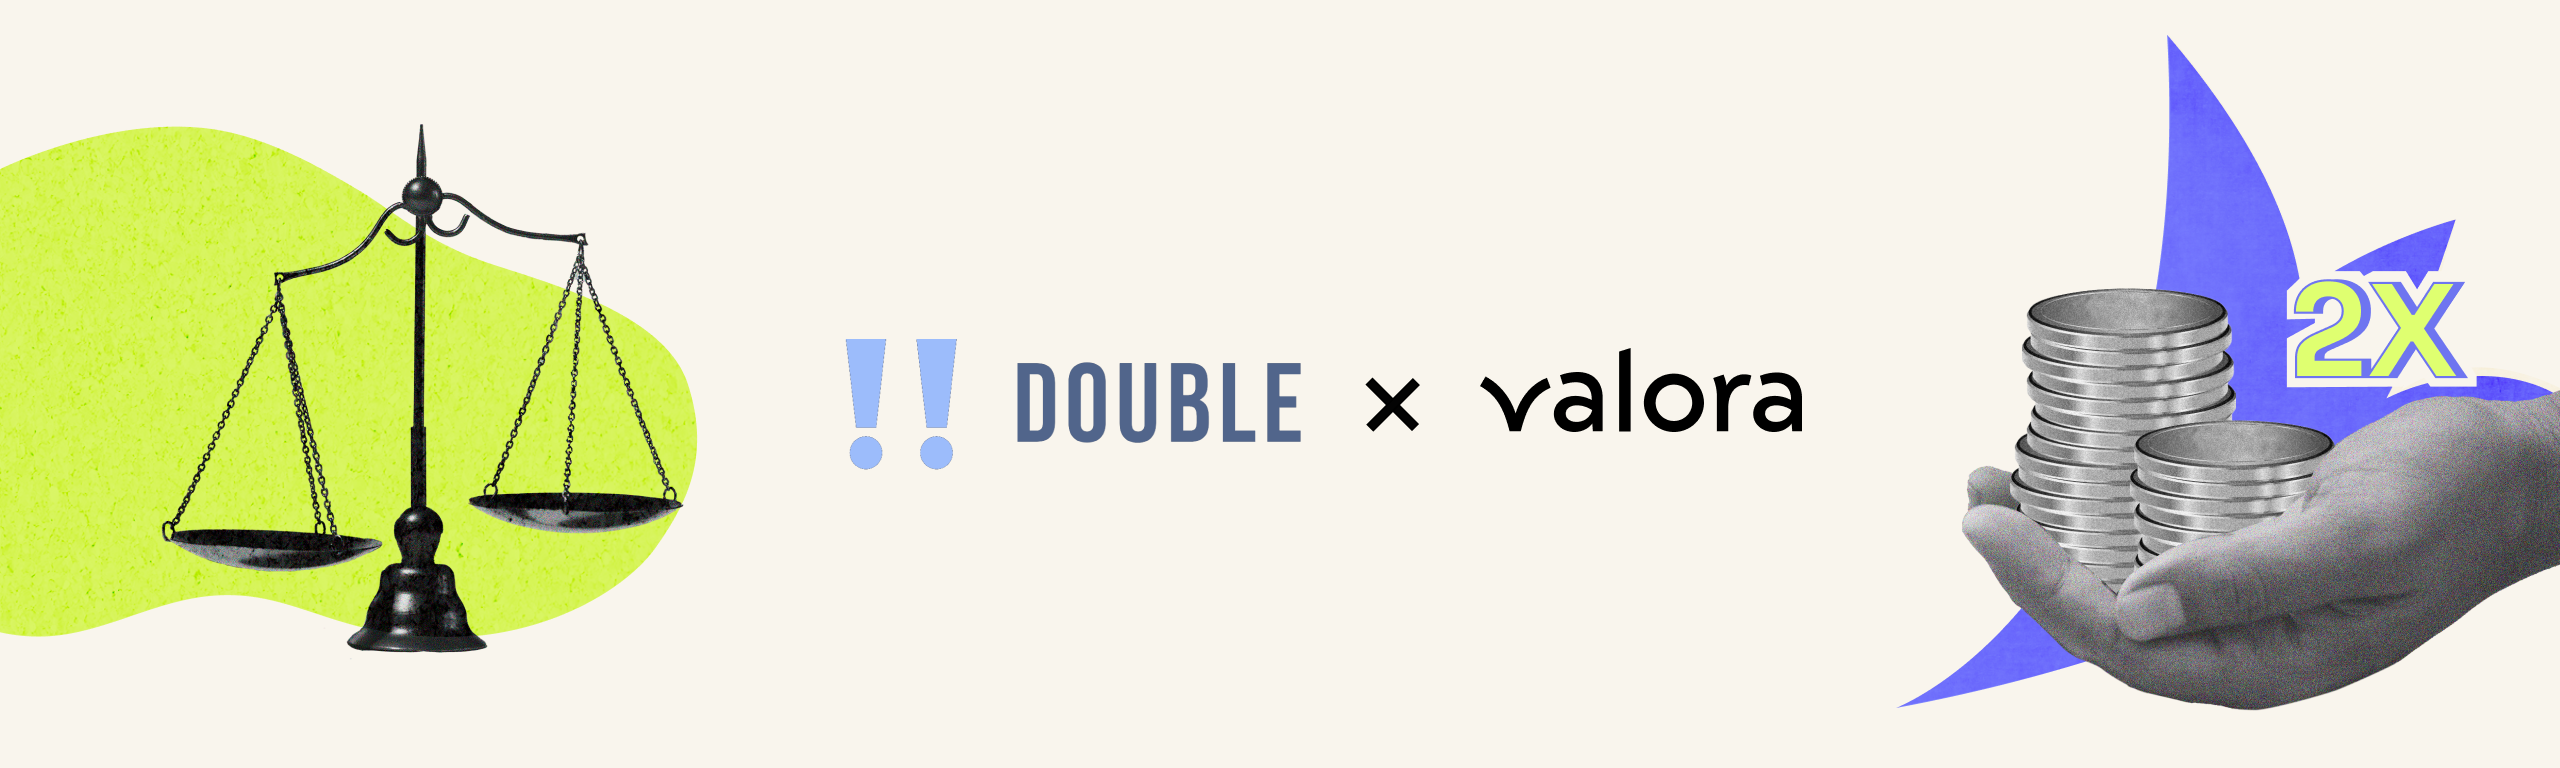 Blog post highlighting Double, what they’re doing, and why that should be important to Valora users